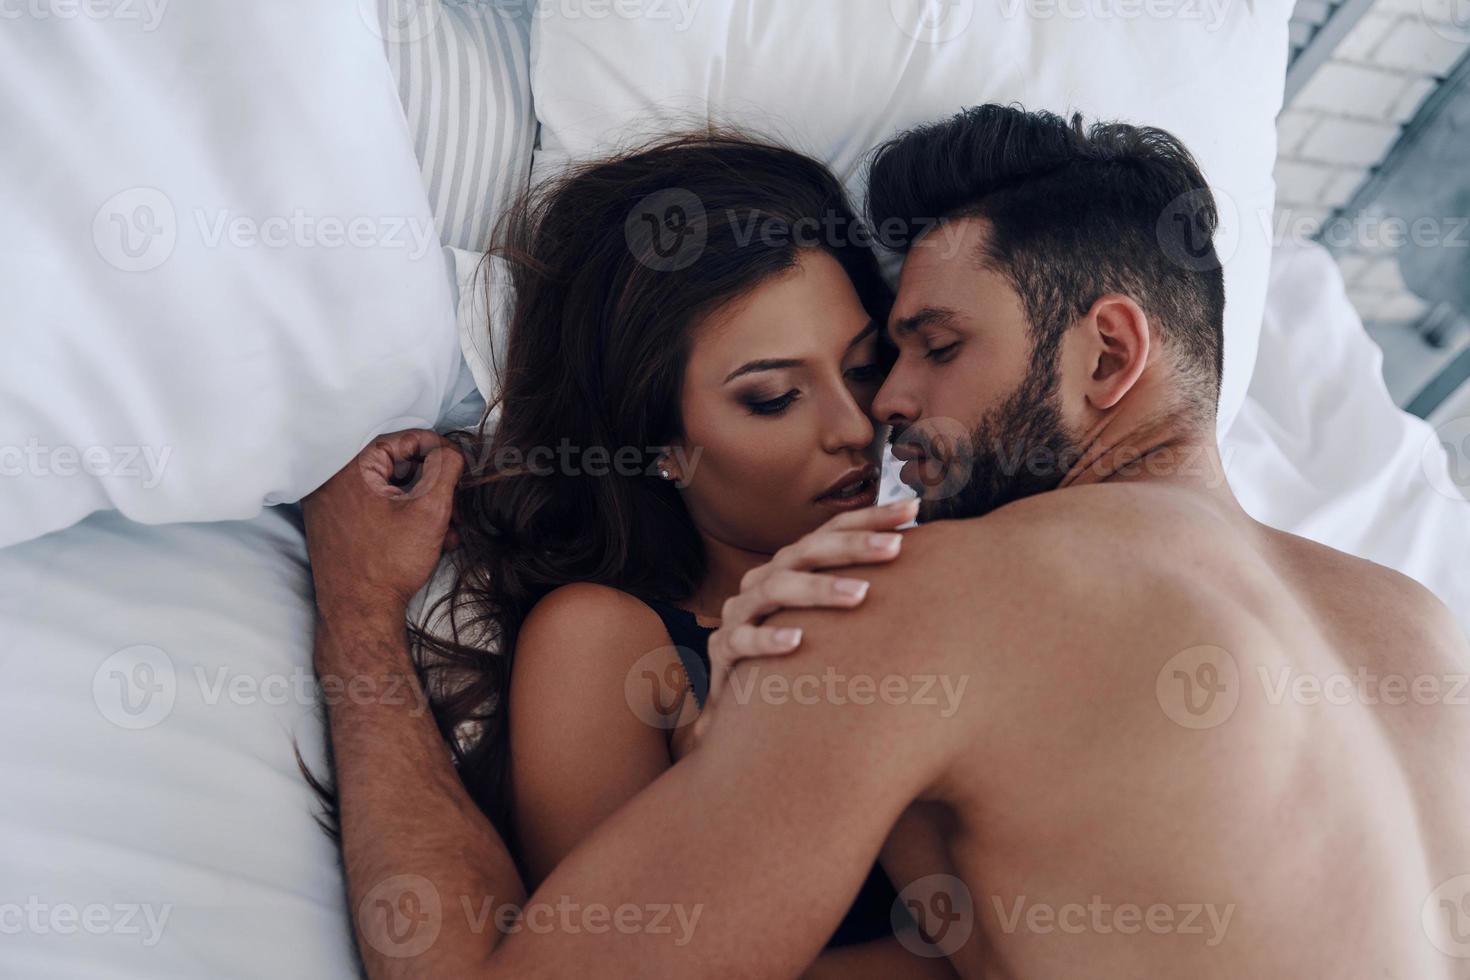 christian cadiente recommends sexy couples making love pic